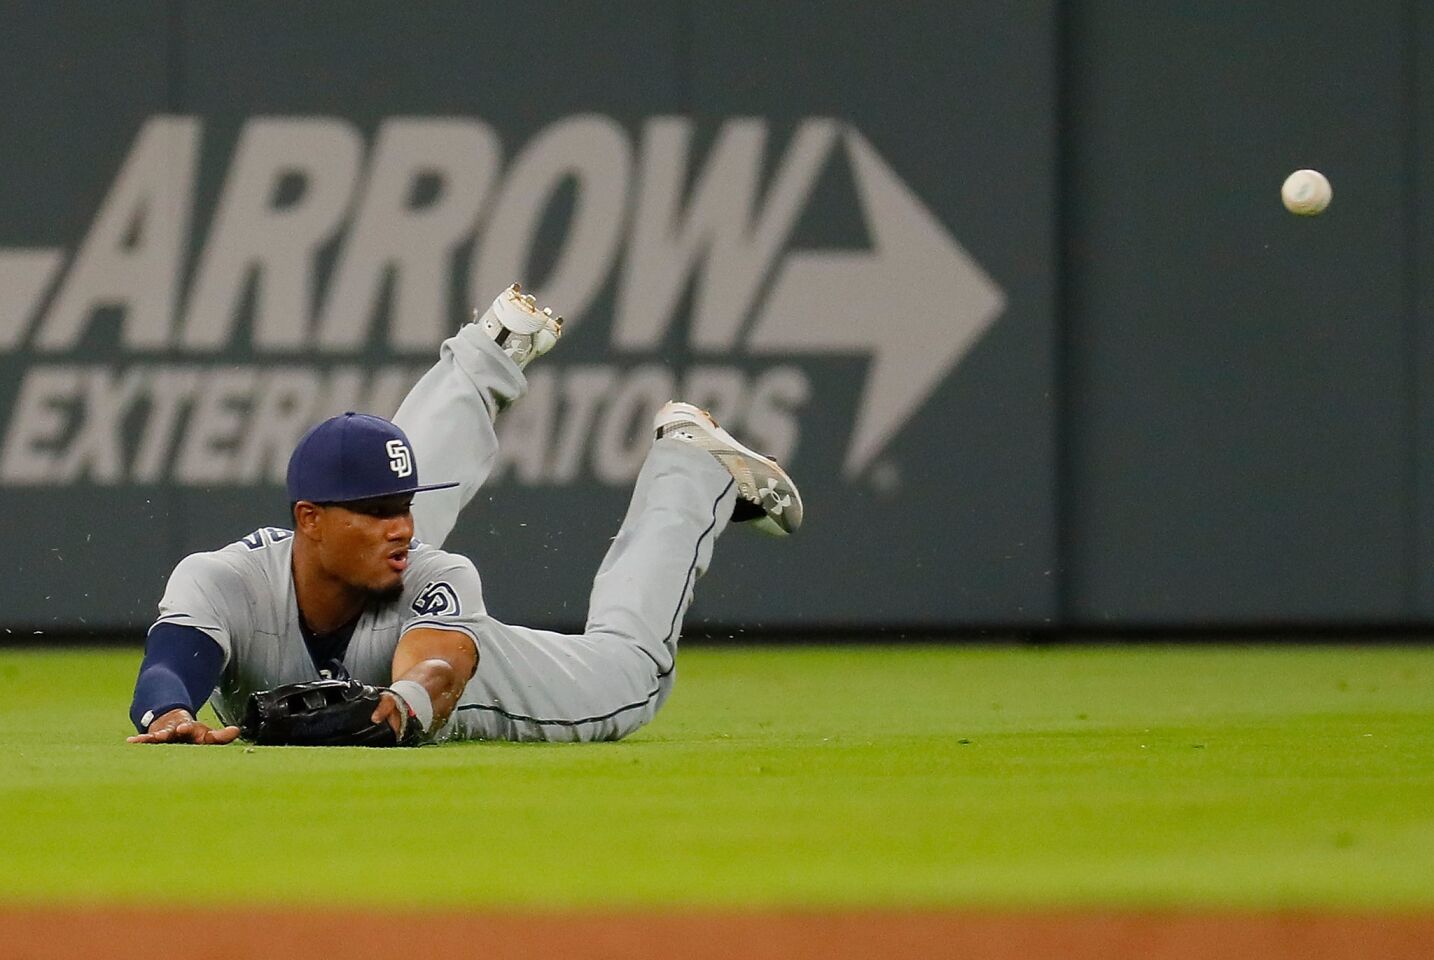 The Padres lost all four games in Atlanta to finish their road trip 2-7. They rank 26th with 45 runs scored and last in the majors with a minus-23 run-differential. The pitching staff’s 22 homers allowed is second-most in the majors behind the Marlins (23).